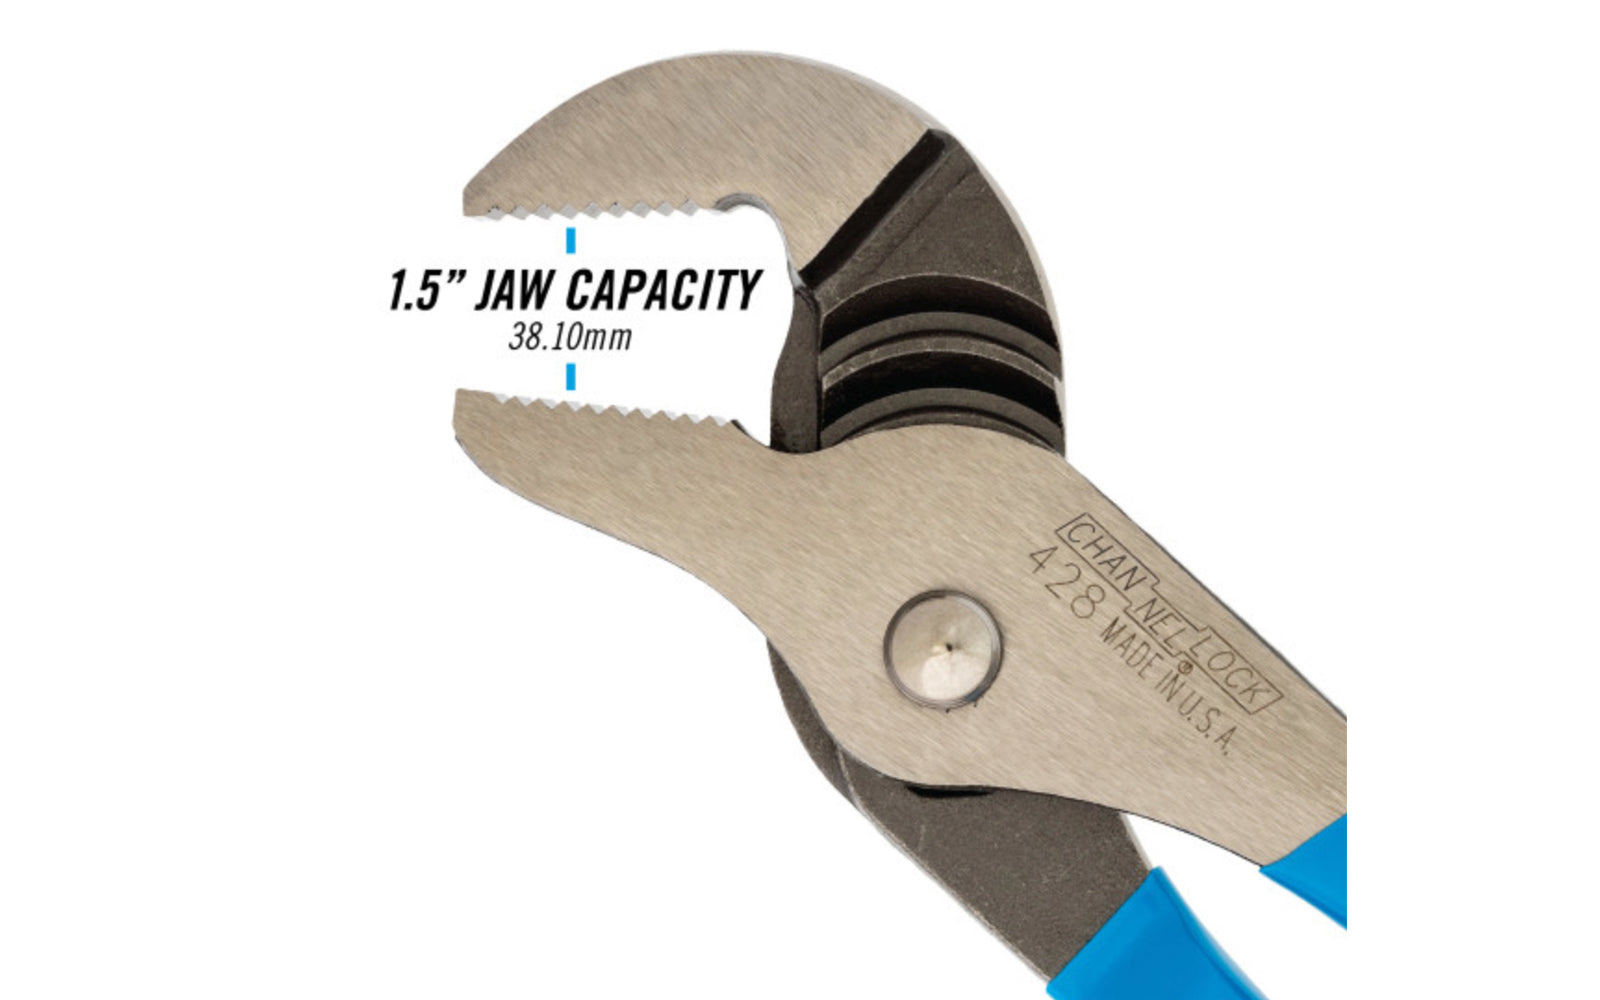 Channellock 8" Straight Jaw Tongue & Groove Plier is built to last with a Permalock fastener to eliminate nut & bolt failure. Laser-hardened teeth to provide a better, longer lasting grip. Channelock Model 428. 025582823311. Professional non-slip channellocks. adjustable tongue and groove plier. Made in USA.